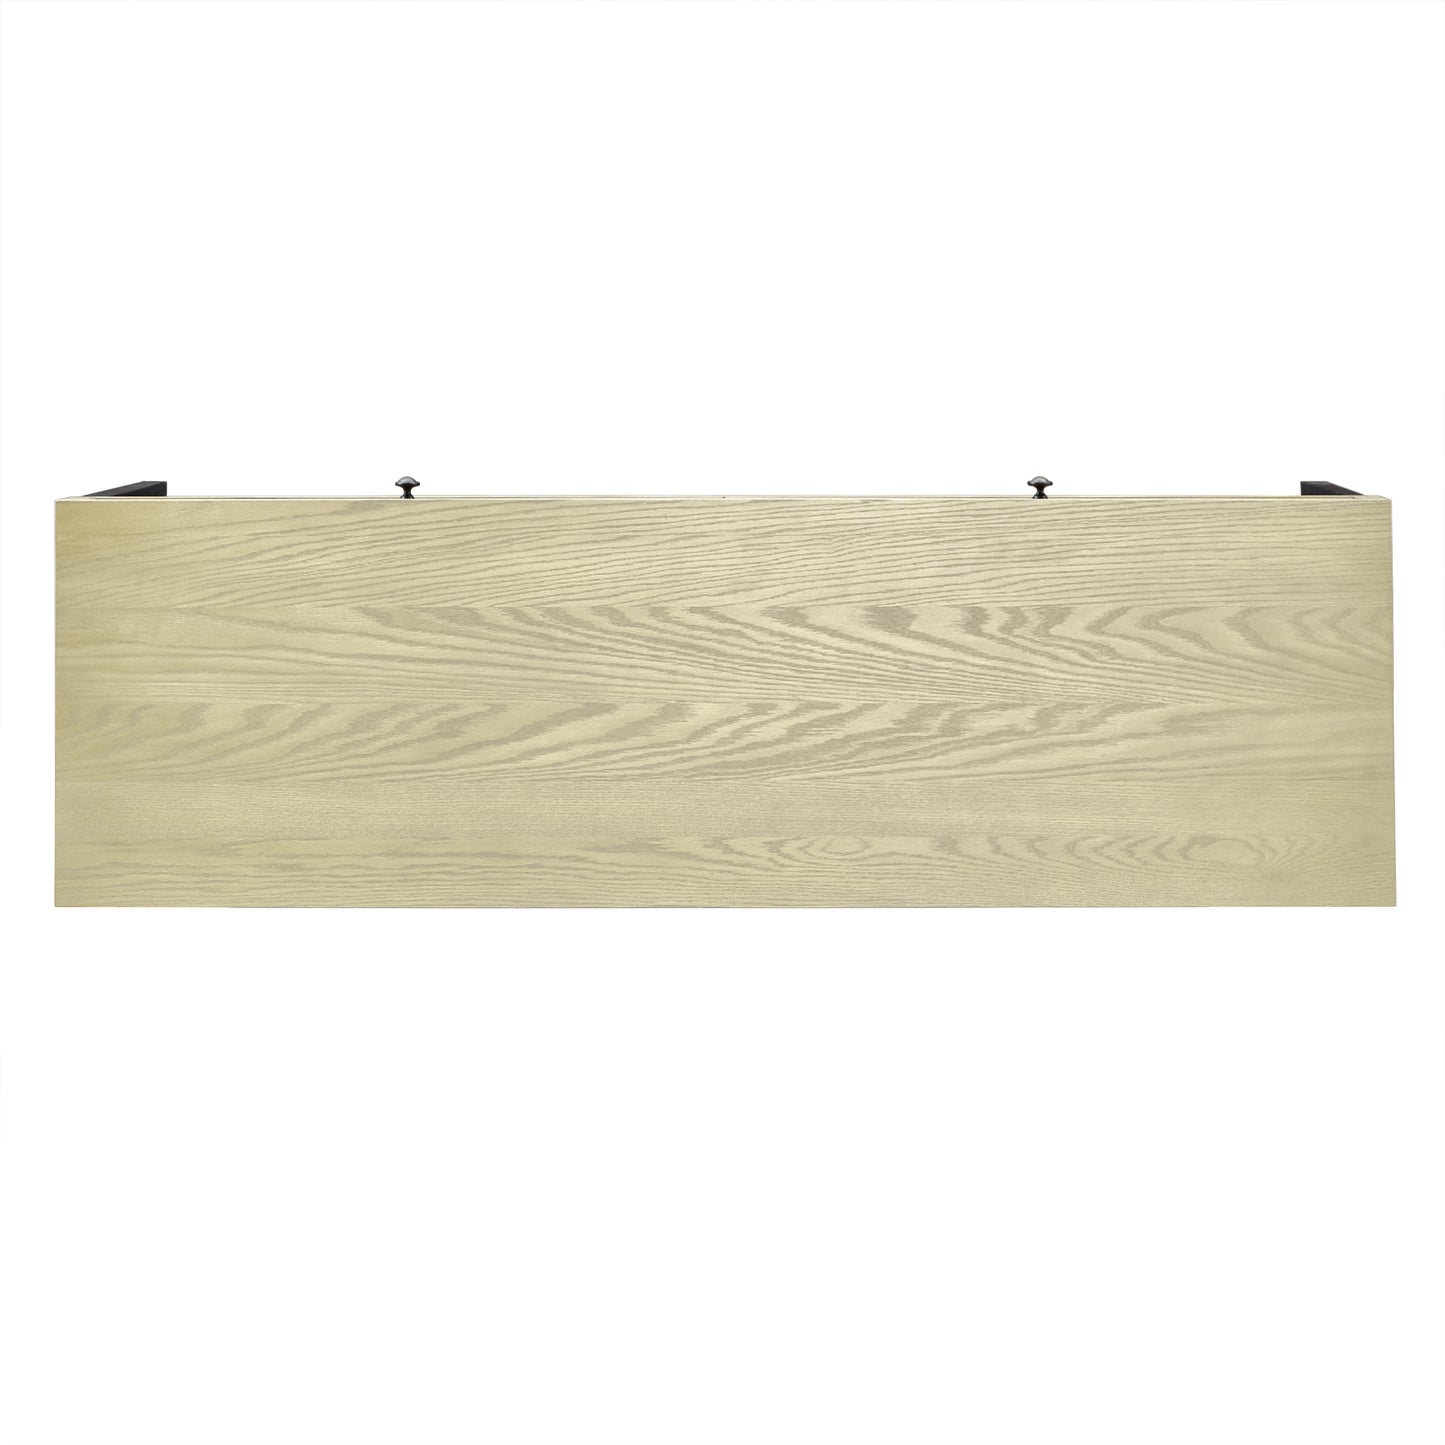 2-Drawer Desk with Power Outlet - Ivory White